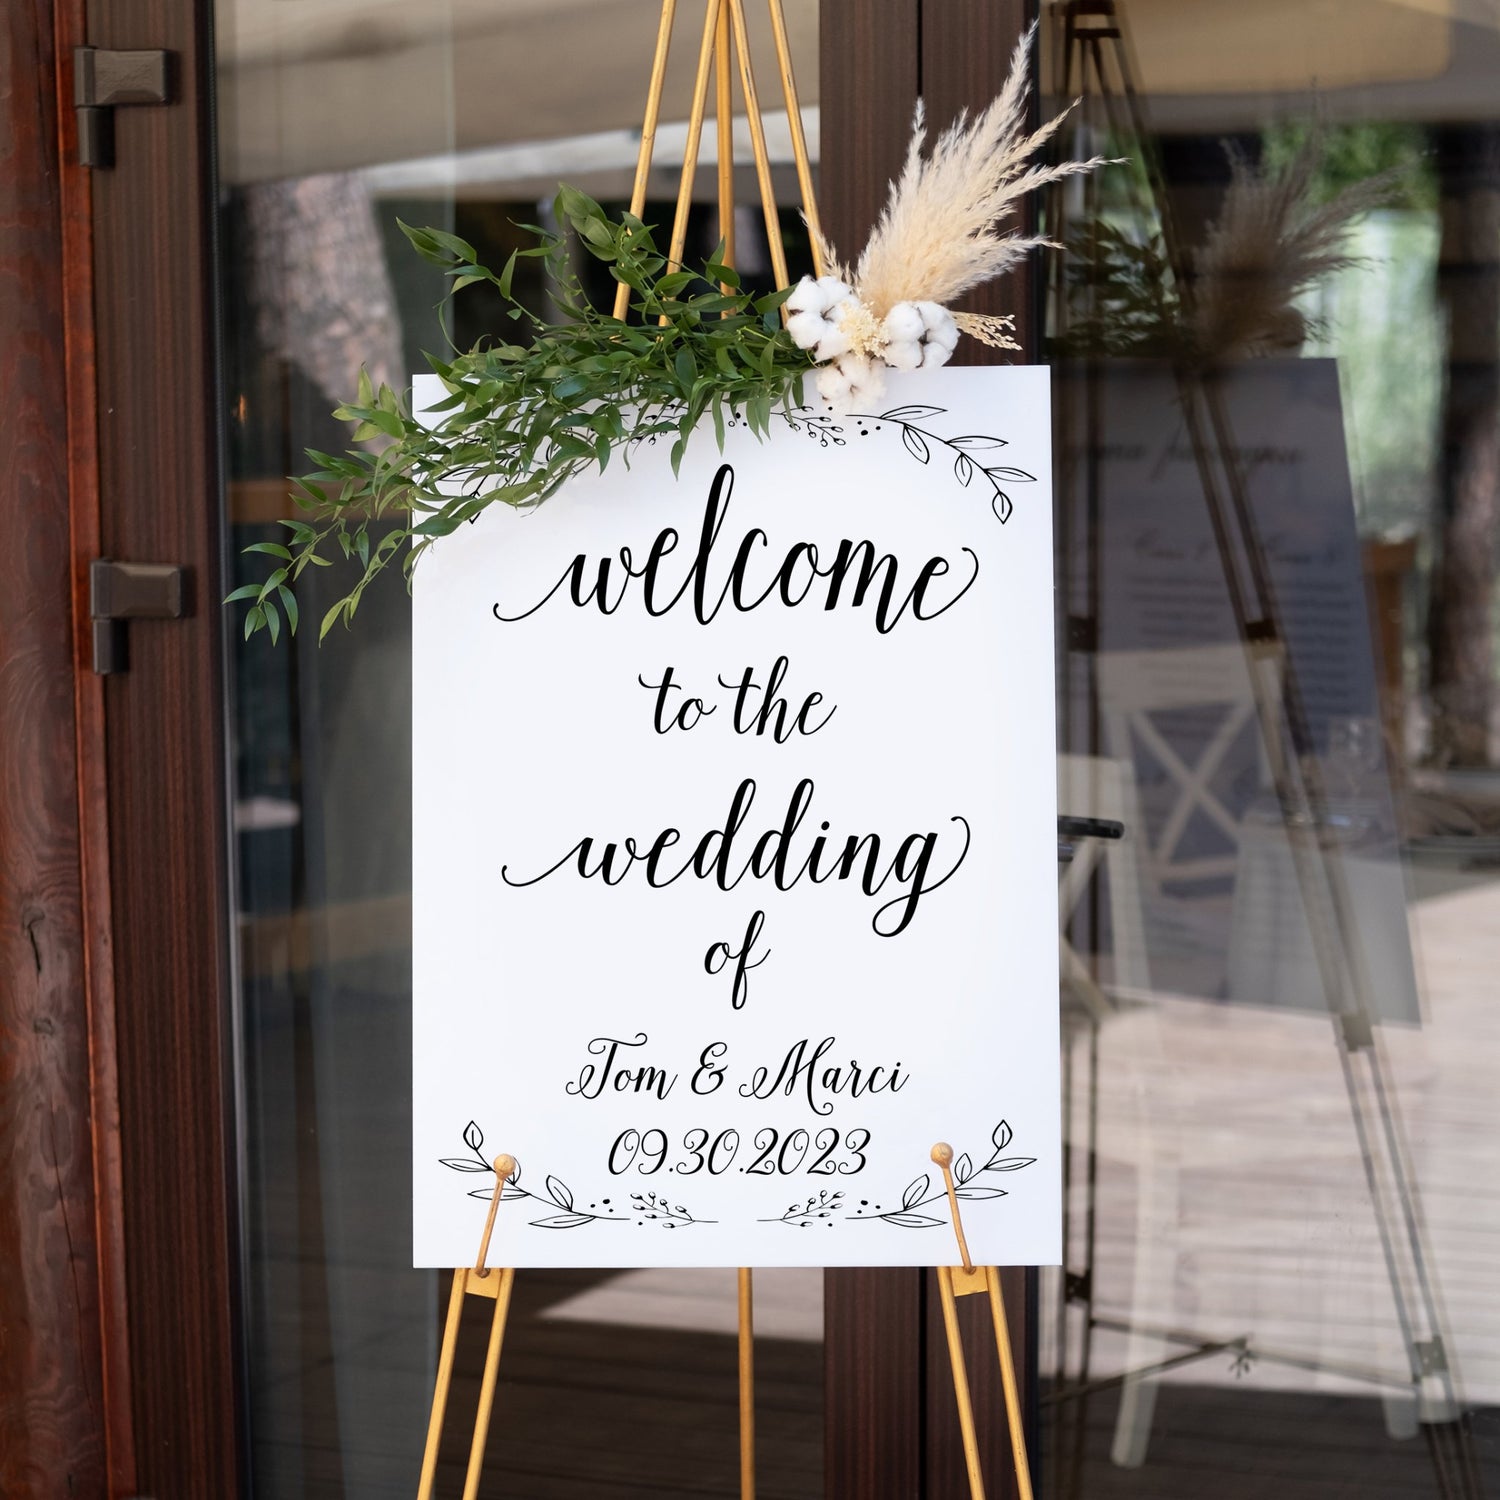 Acrylic Welcome Sign for Weddings - Glass Wedding Sign Personalized with Names and Date for Wedding Ceremony or Reception AMSCC-5 - SCC Signs